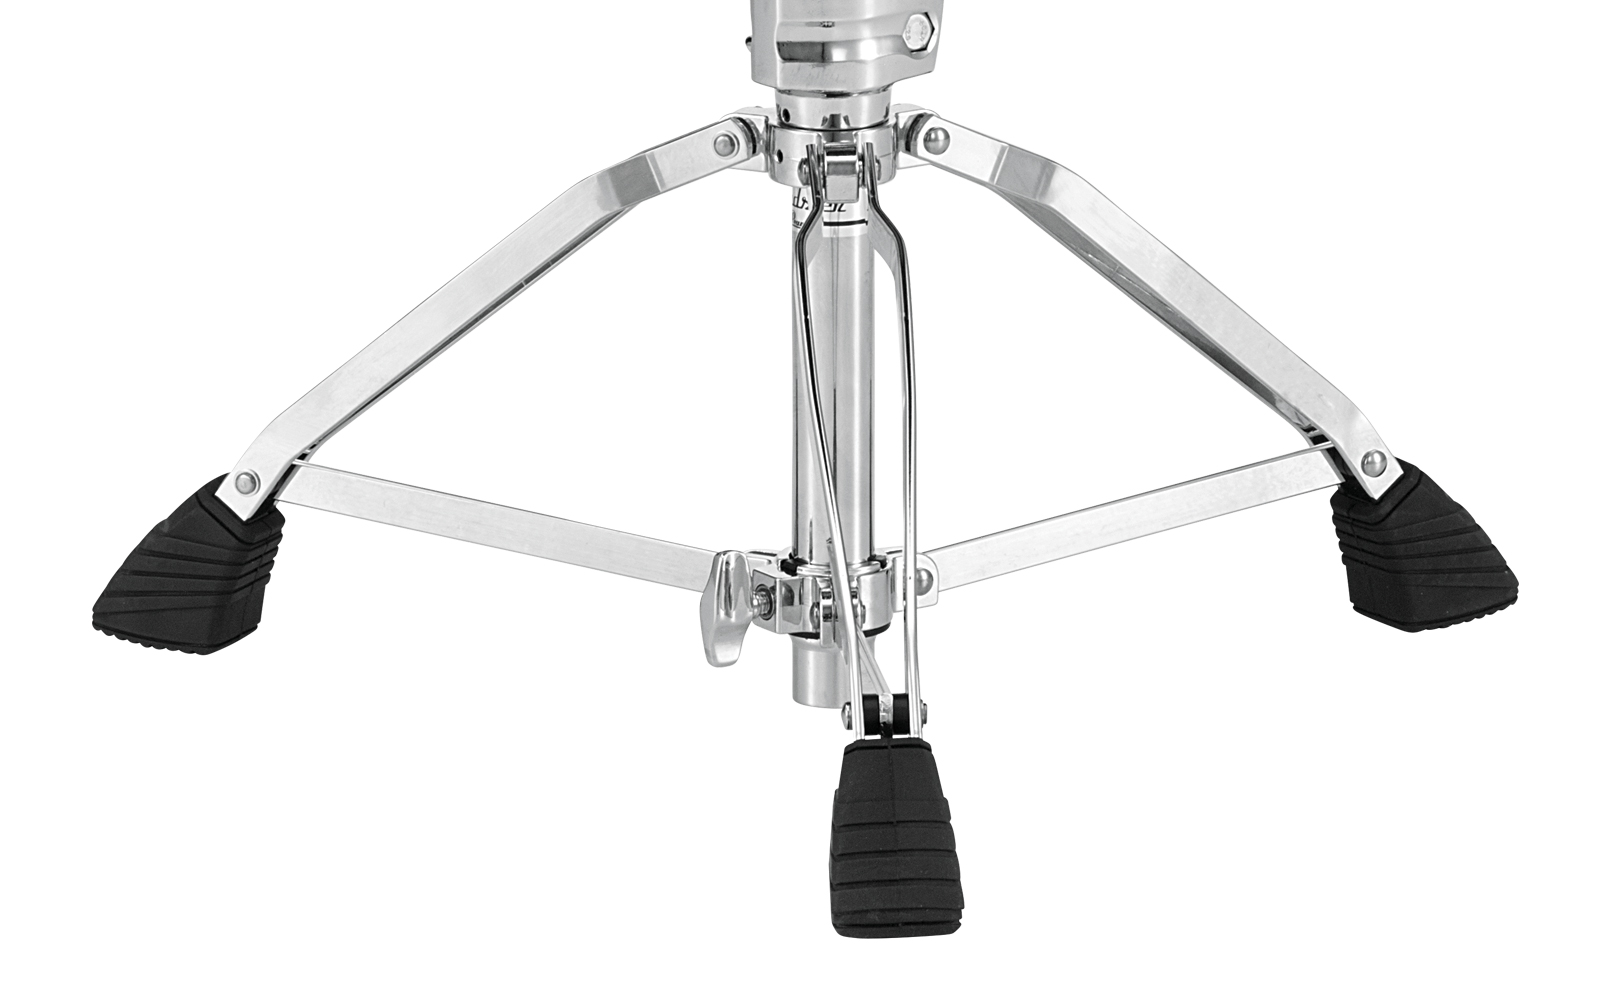 D-1500SP Roadster Drum Throne, Vented Round Seat Type, Shock Absorber Post